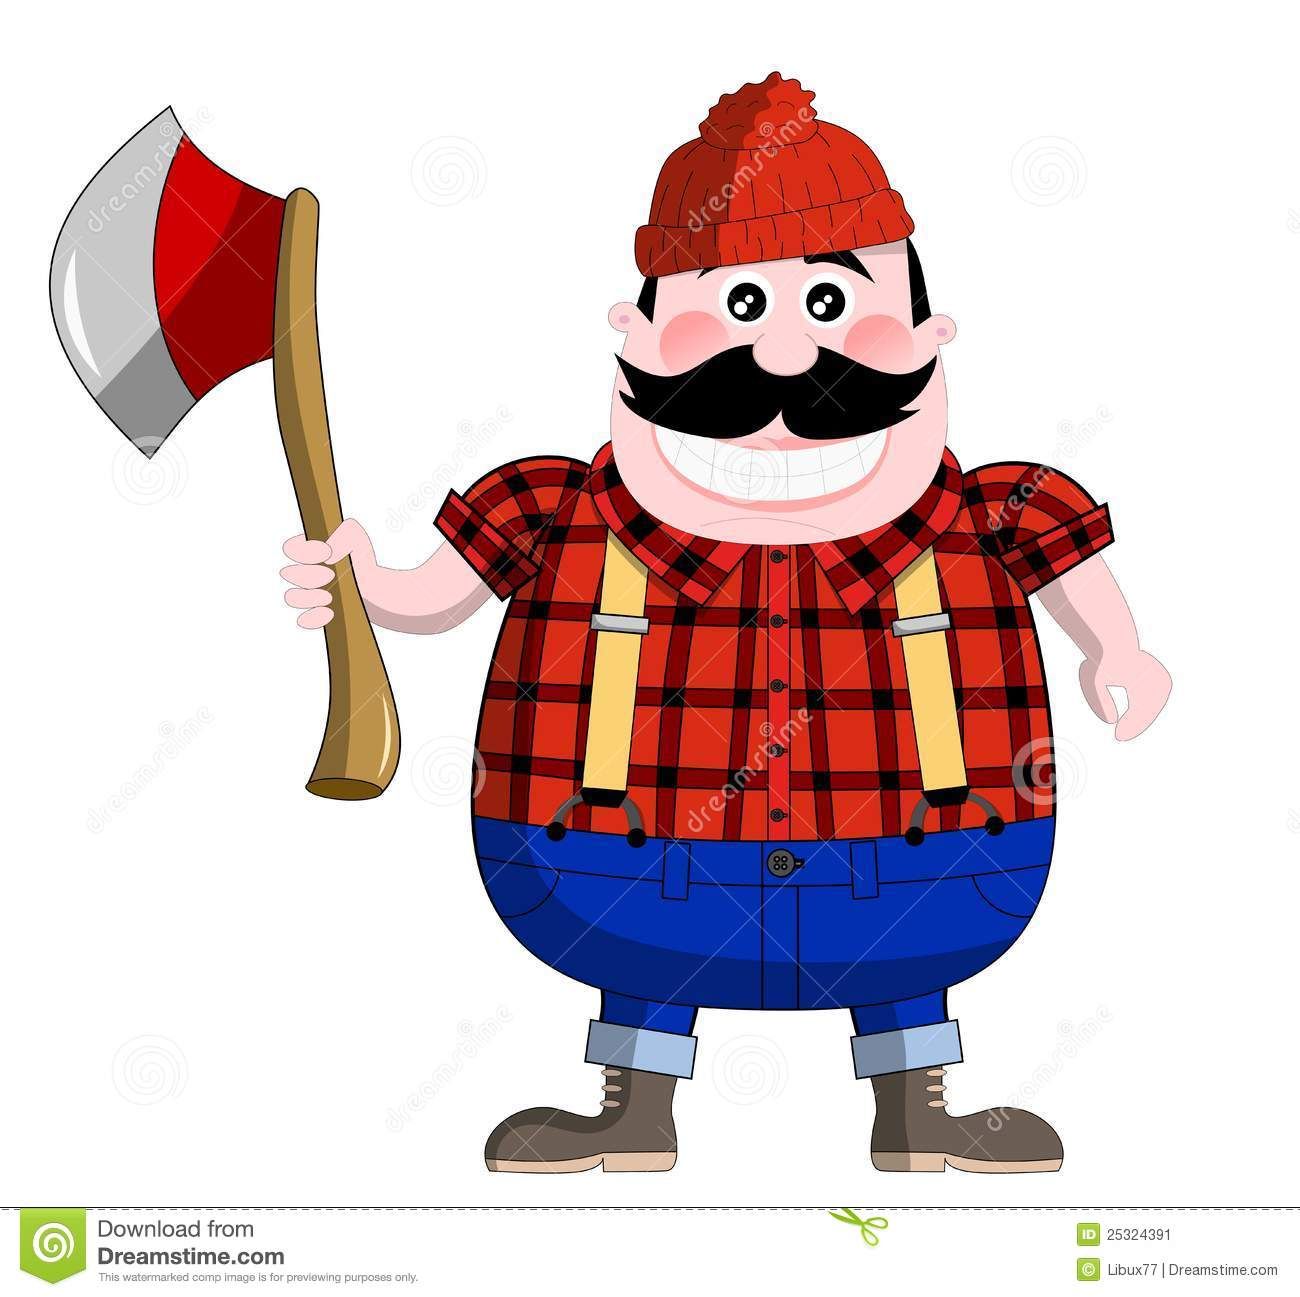 Image result for cartoon. Lumberjack clipart character